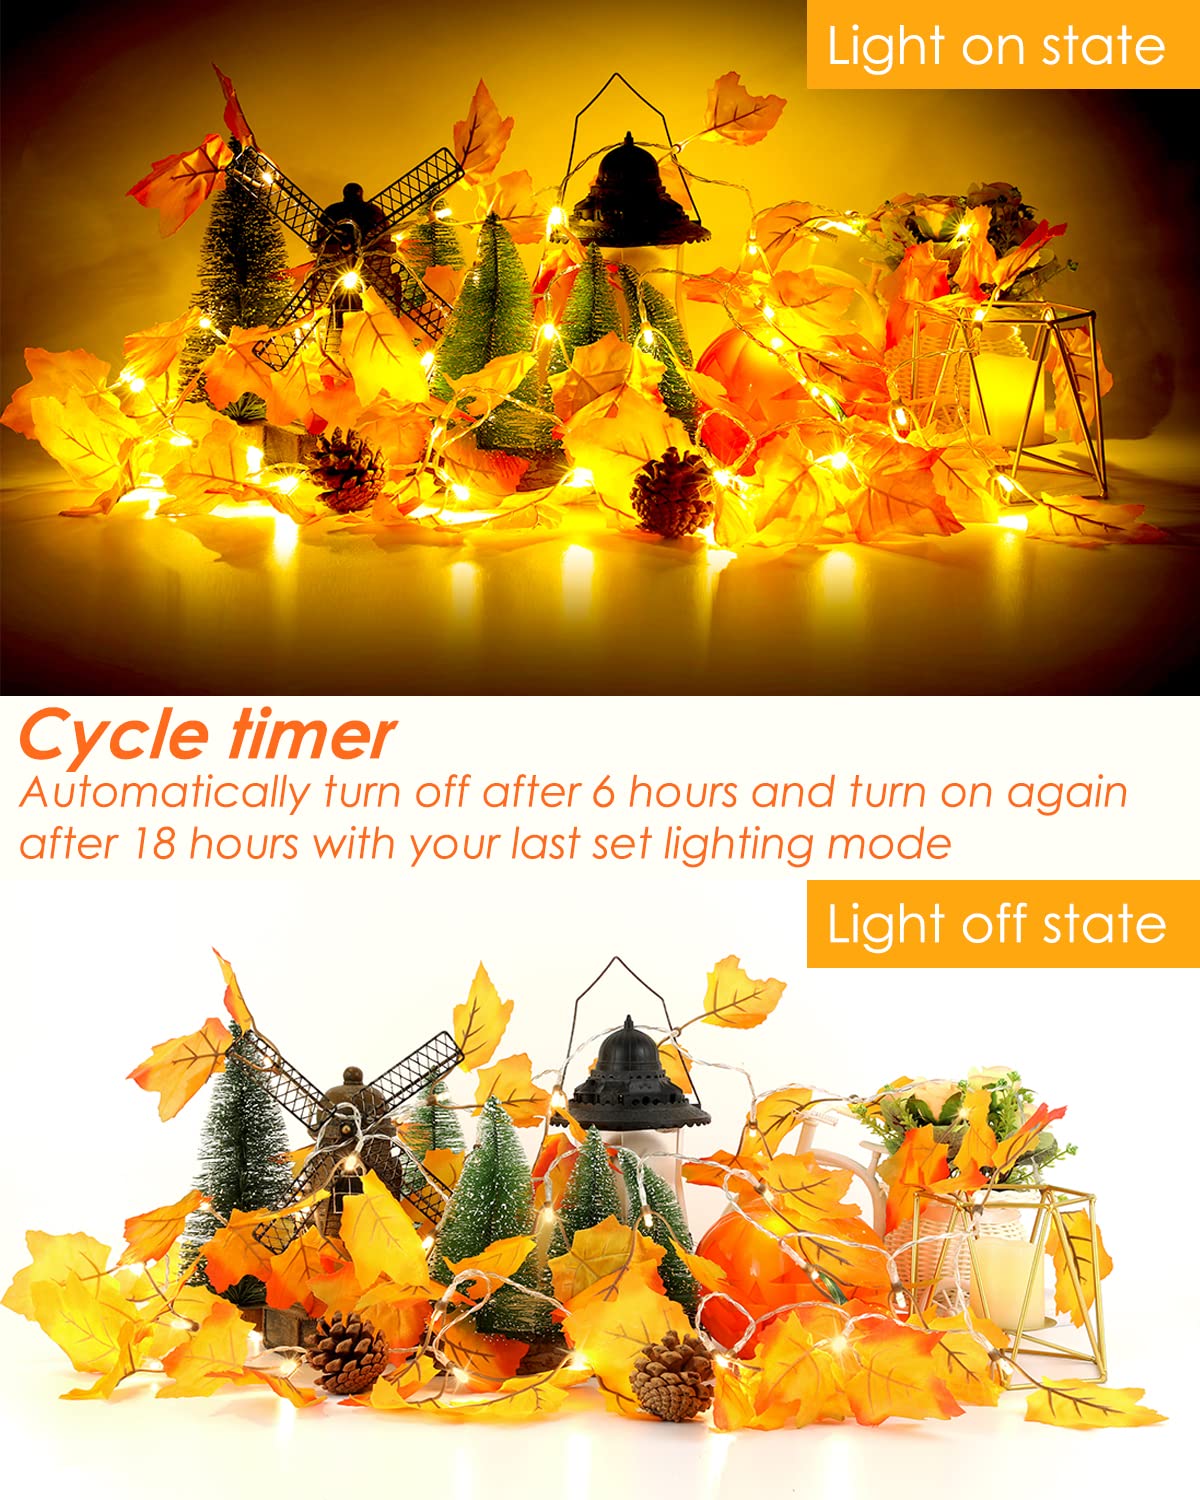 [8 Lighting Modes & Timer] Thanksgiving Decorations for Home Maple Leaf Garland with Lights 40LED Battery Operated Waterproof String Lights, Fall Decor Indoor Halloween Friendsgiving Autumn